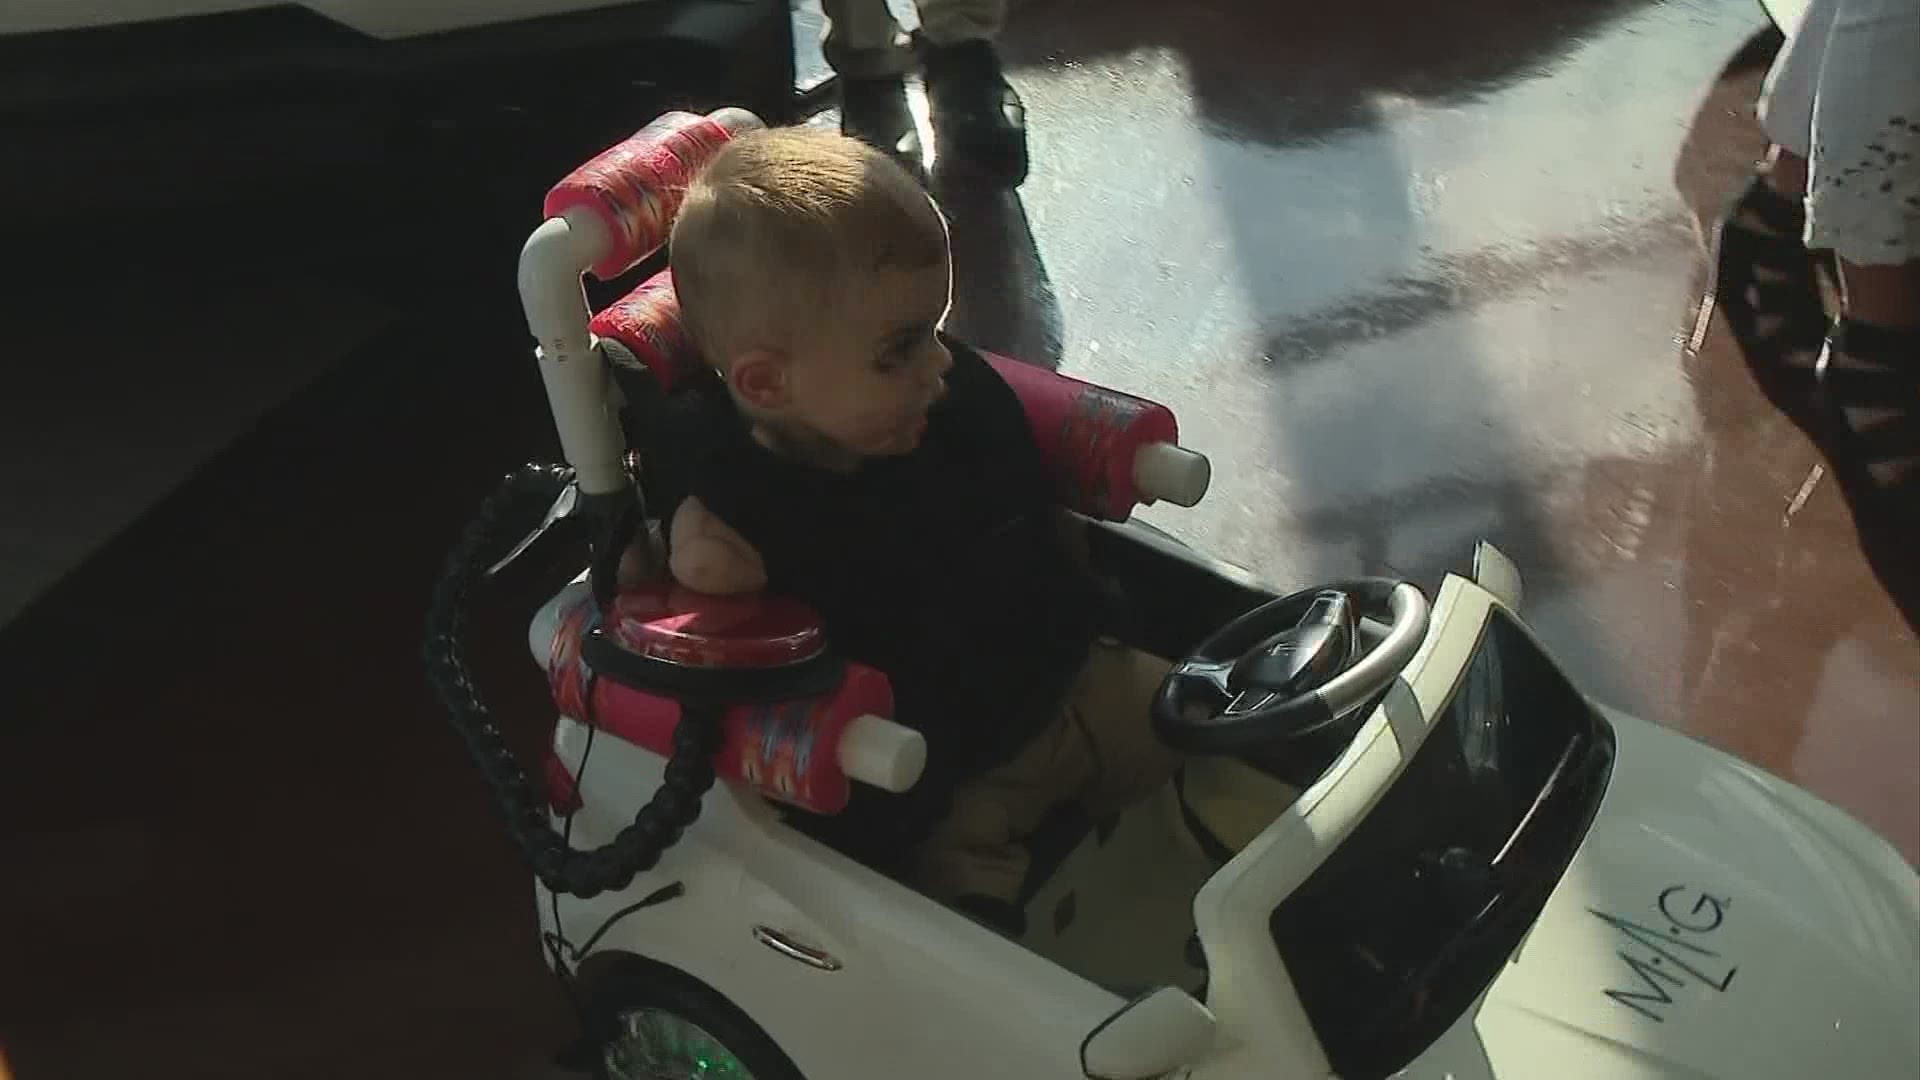 Strep caused Alexander to lose all his limbs but that isn't stopping him from moving.